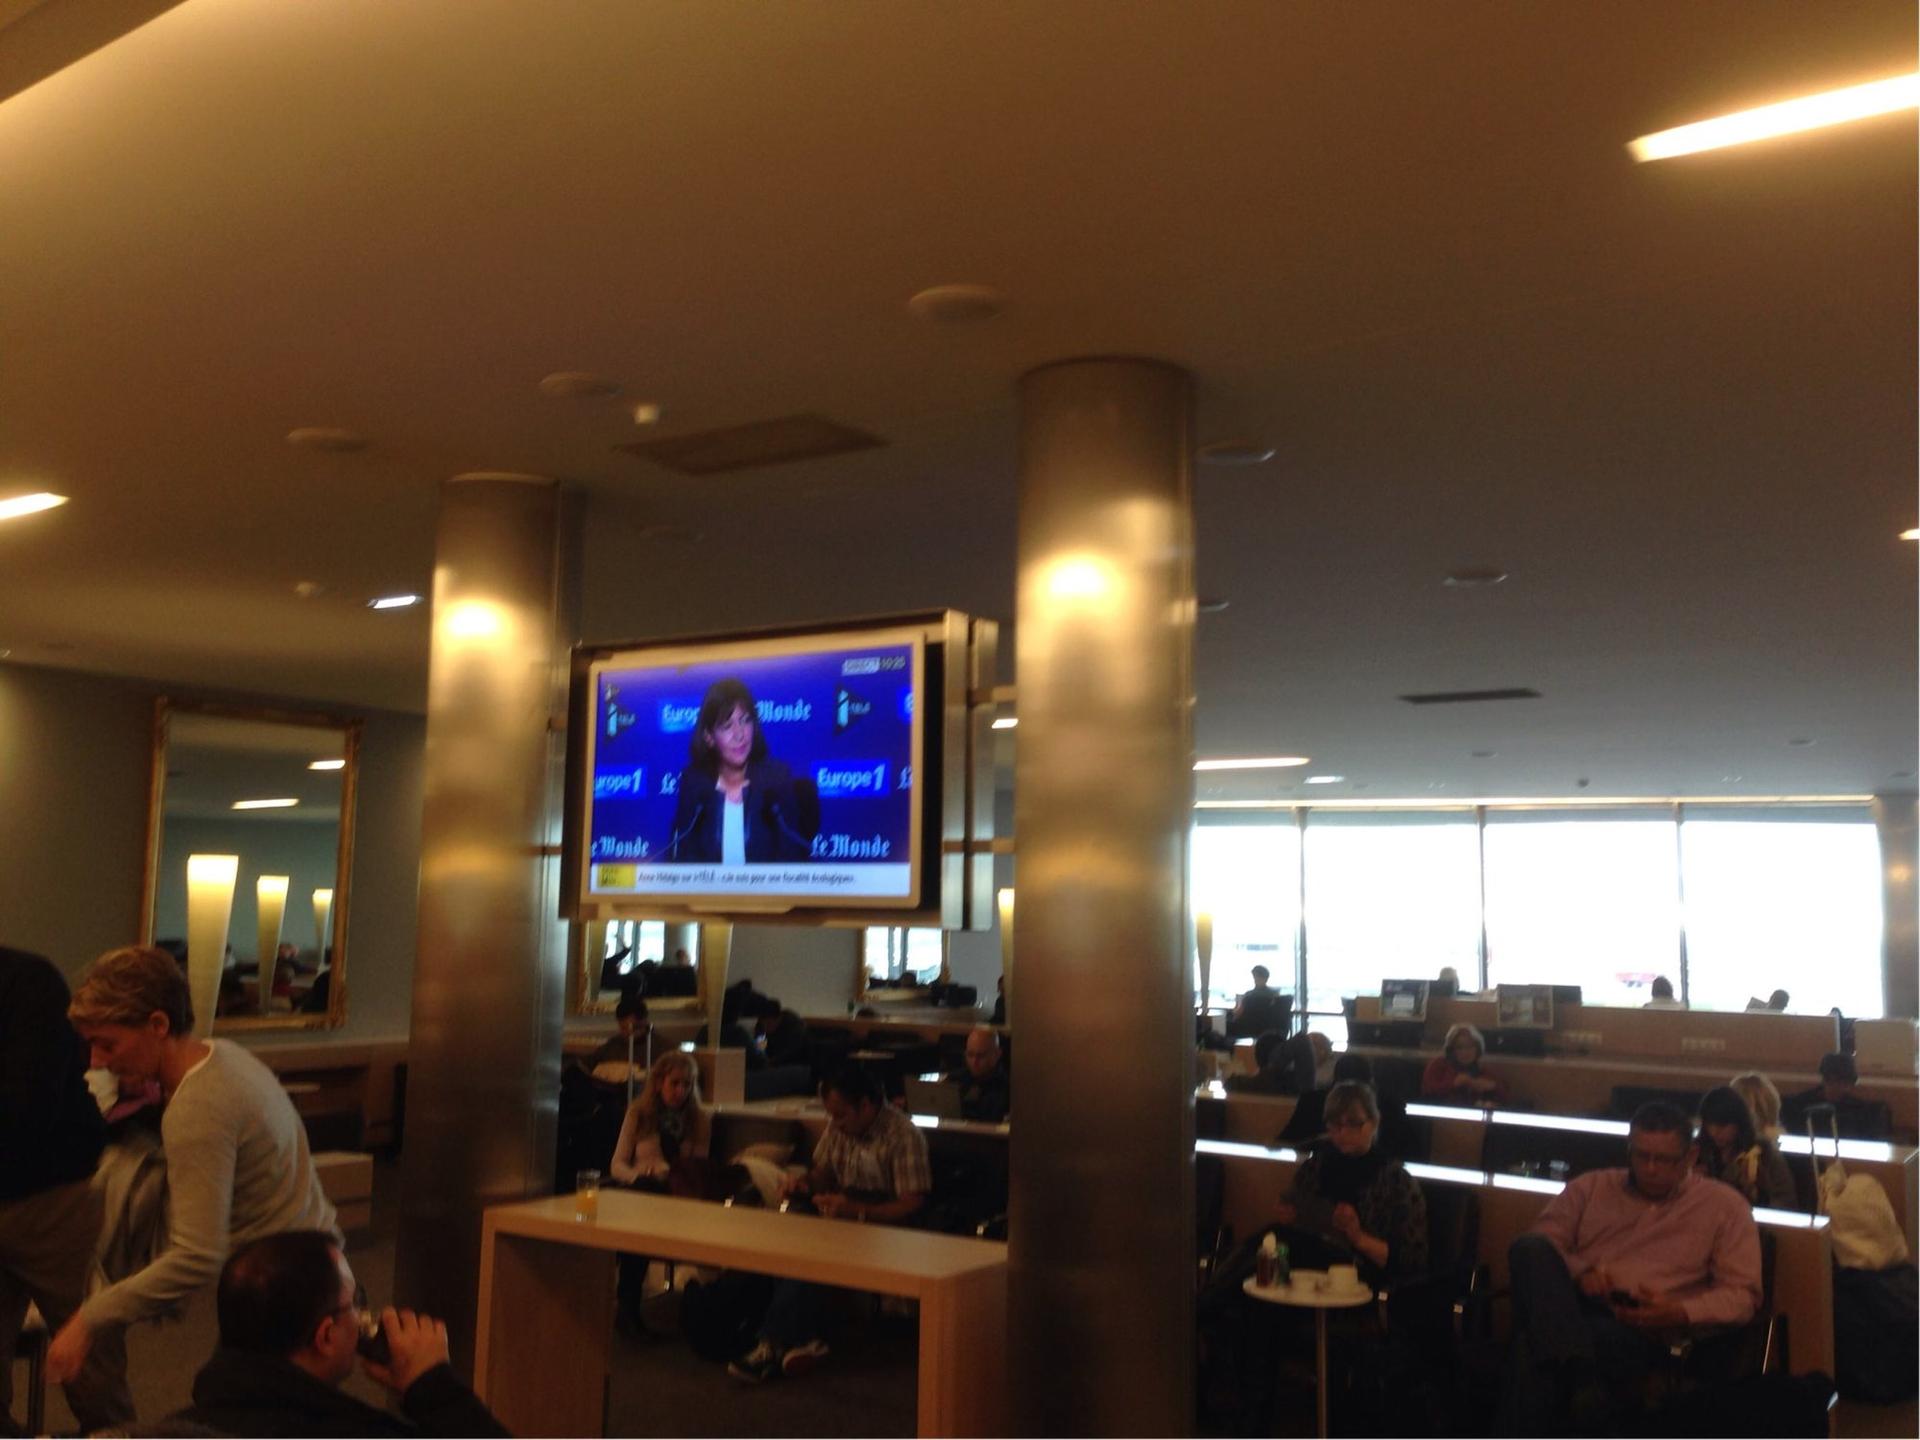 American Airlines Admirals Club  image 9 of 25